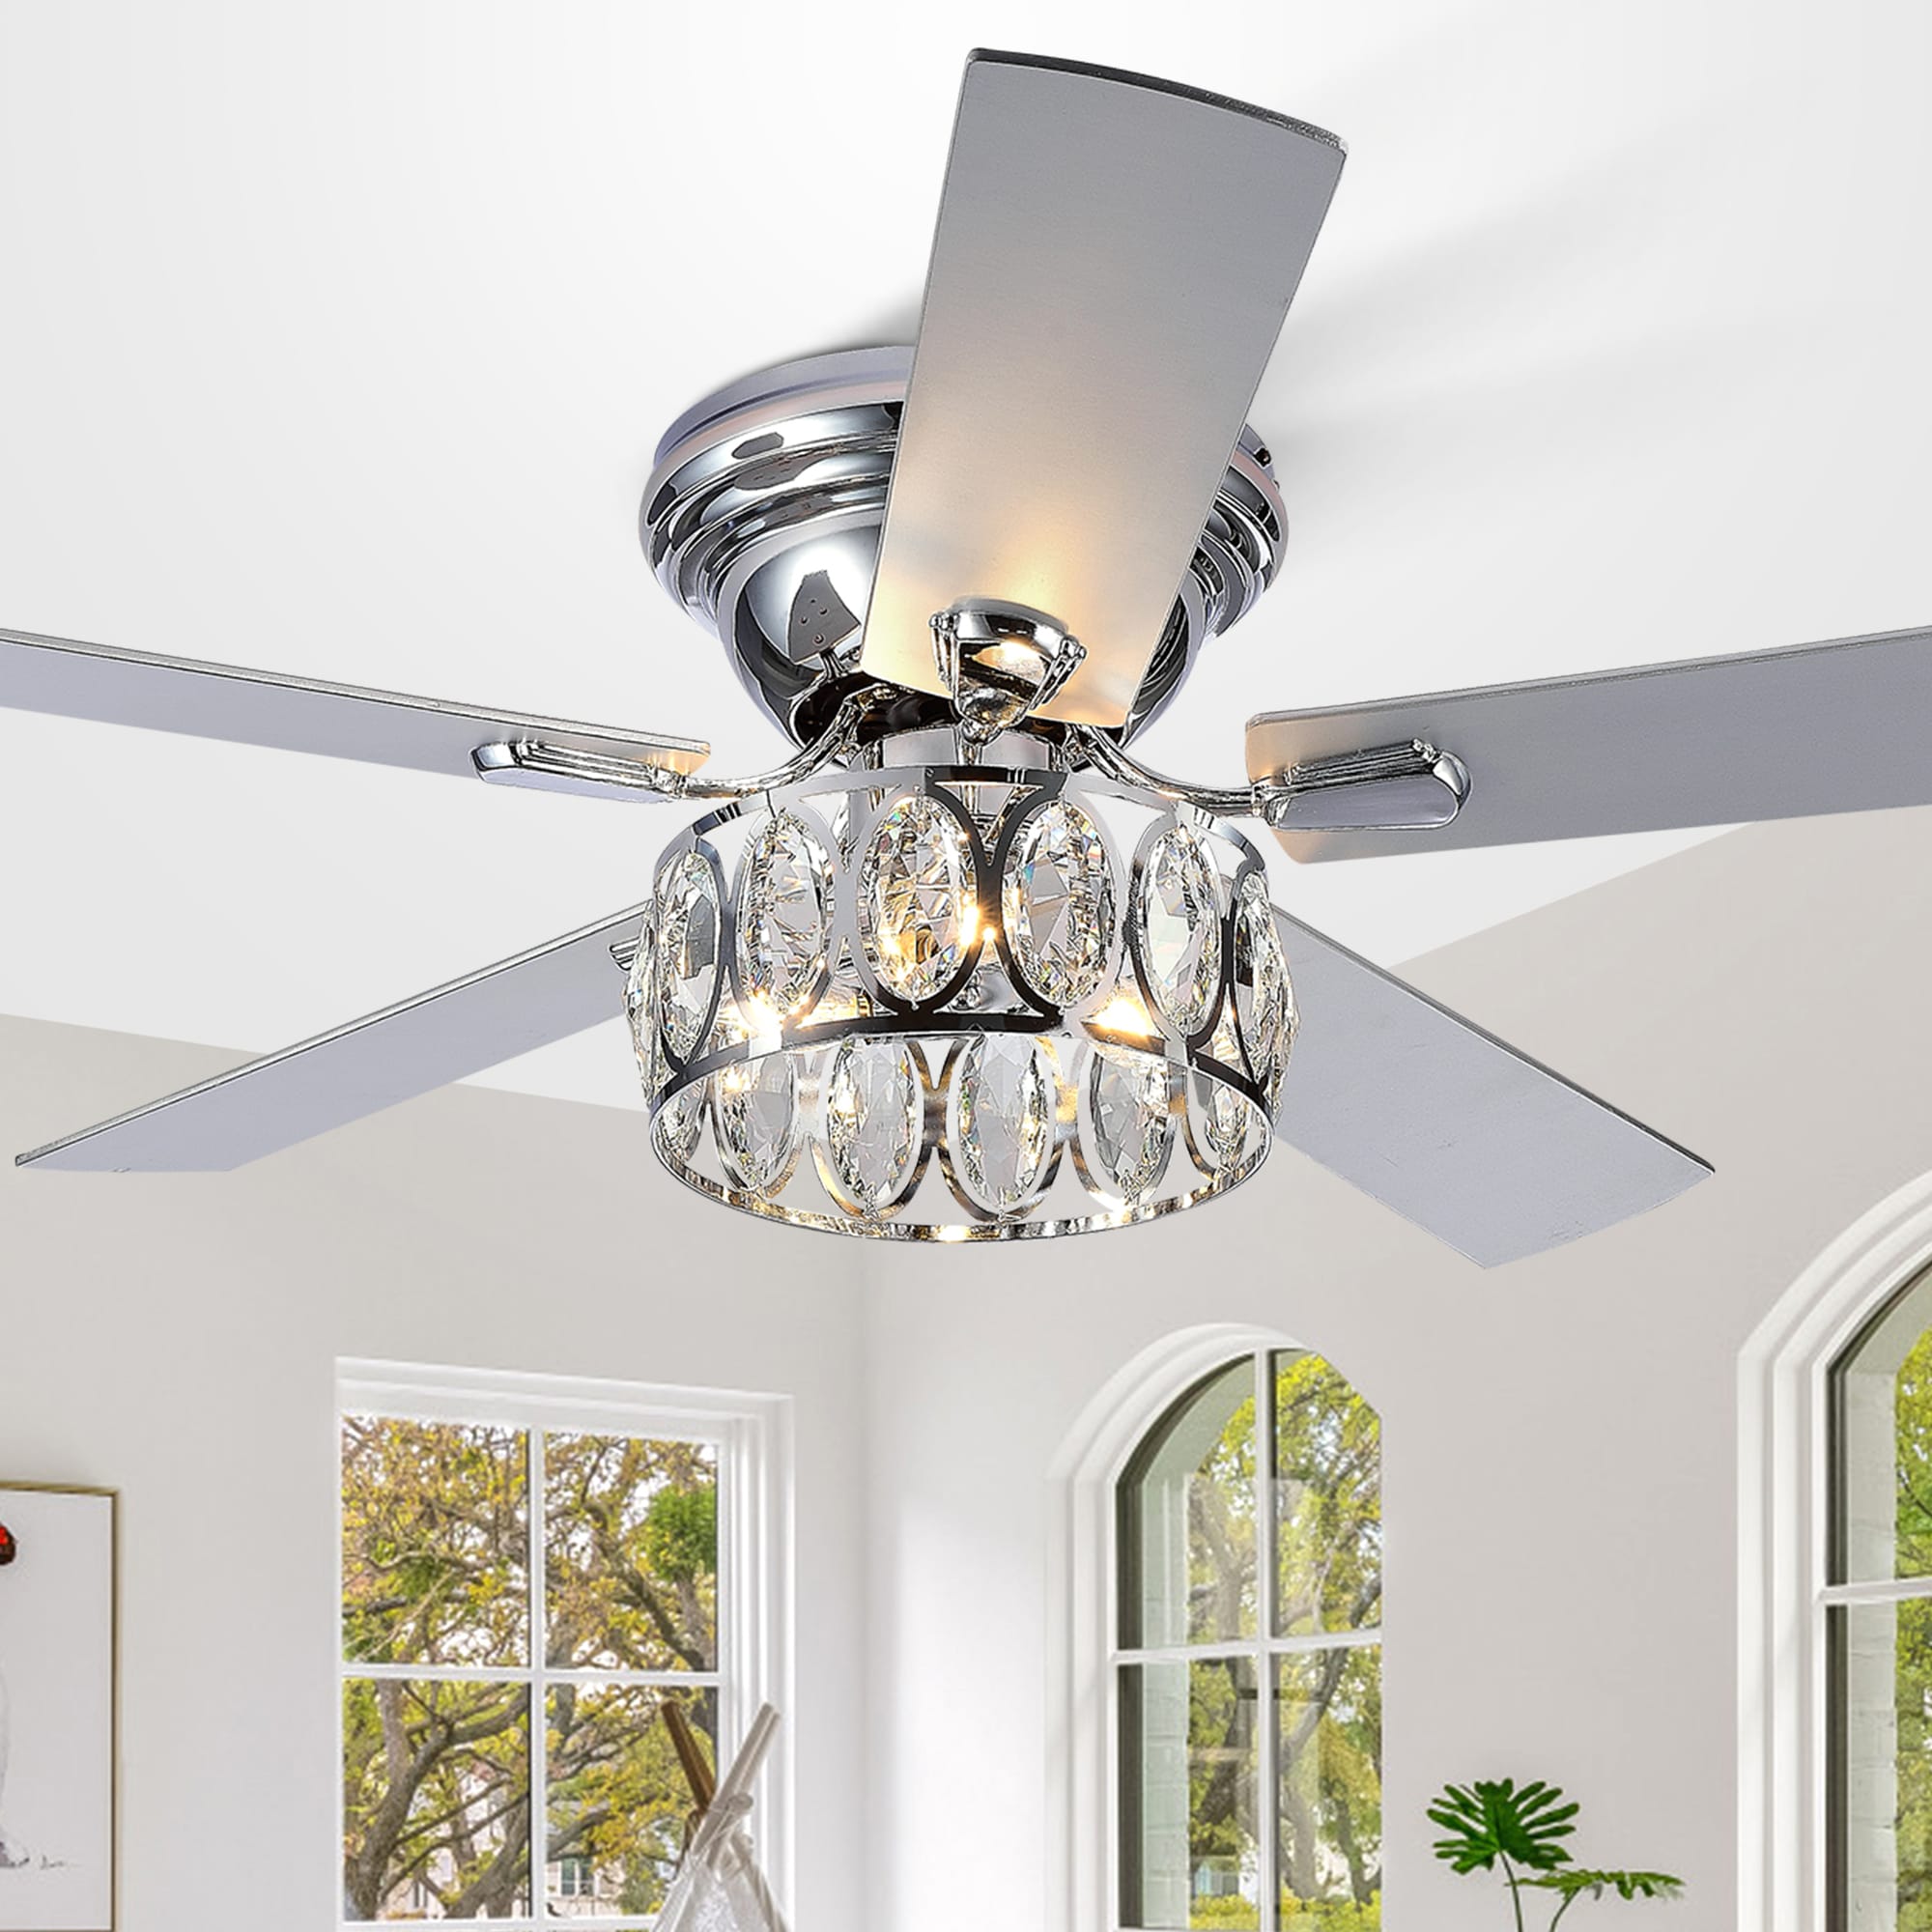 Breezary 52-in Chrome Indoor Flush Mount Chandelier Ceiling Fan with ...